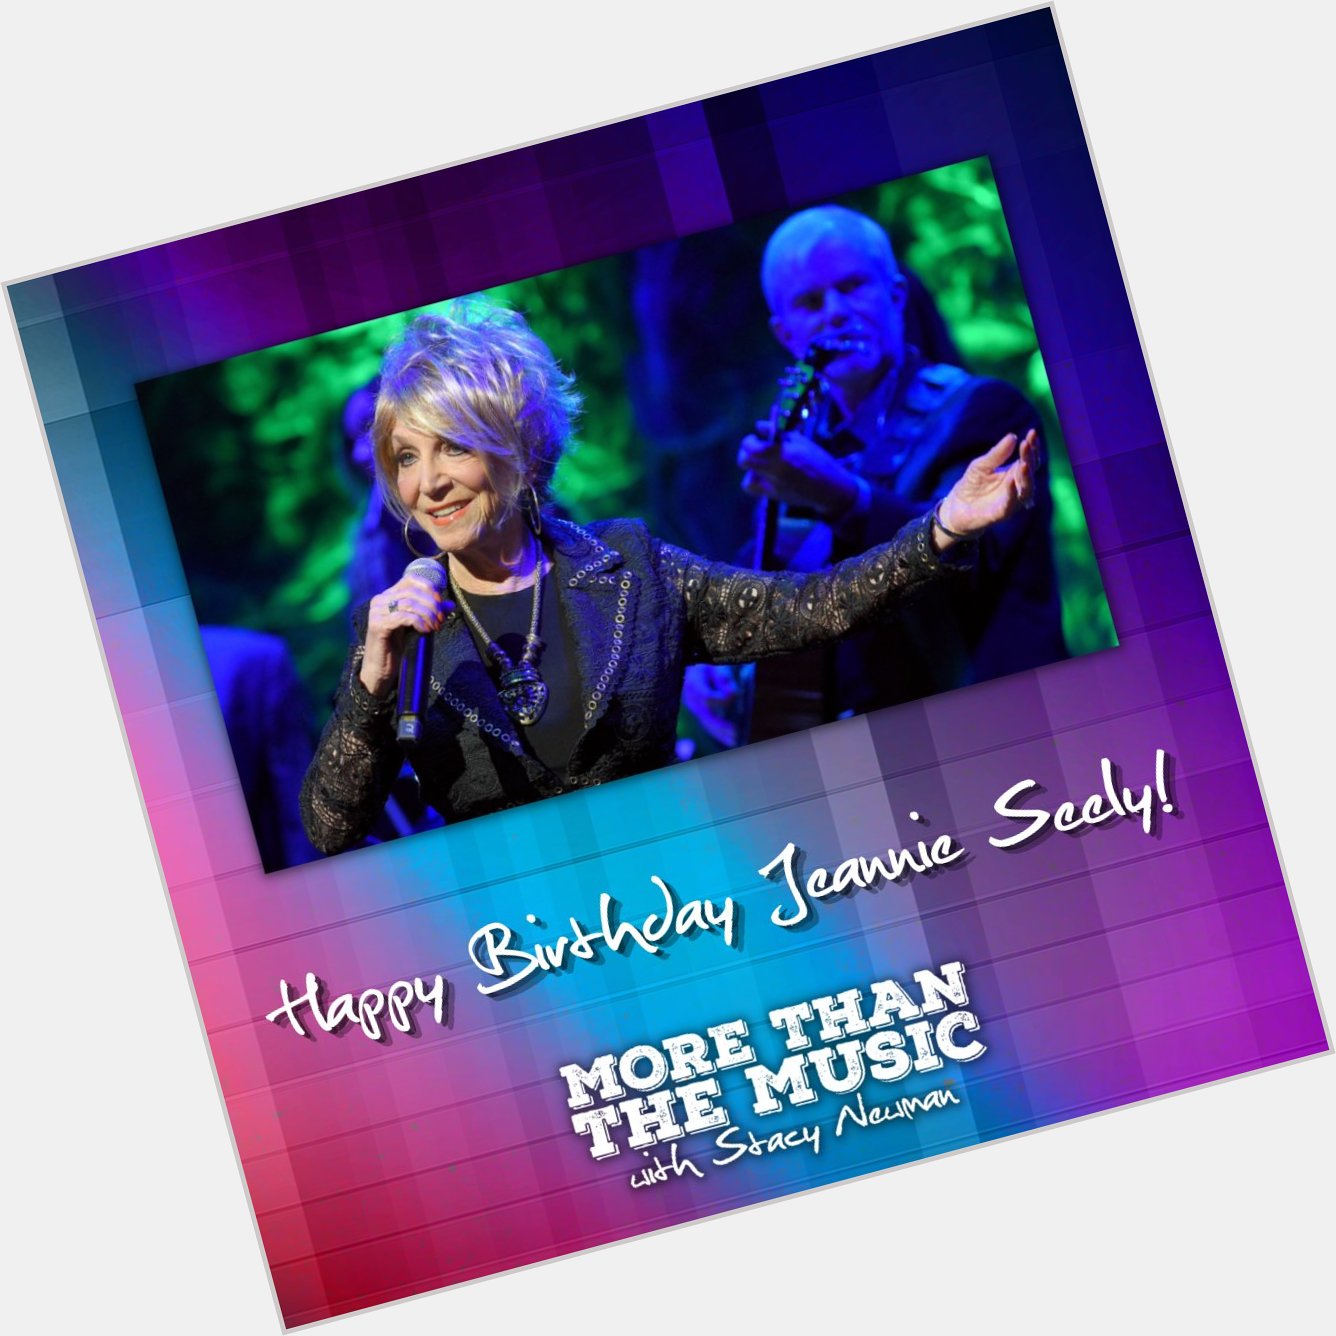 Happy Birthday to an absolute legend: Jeannie Seely! 